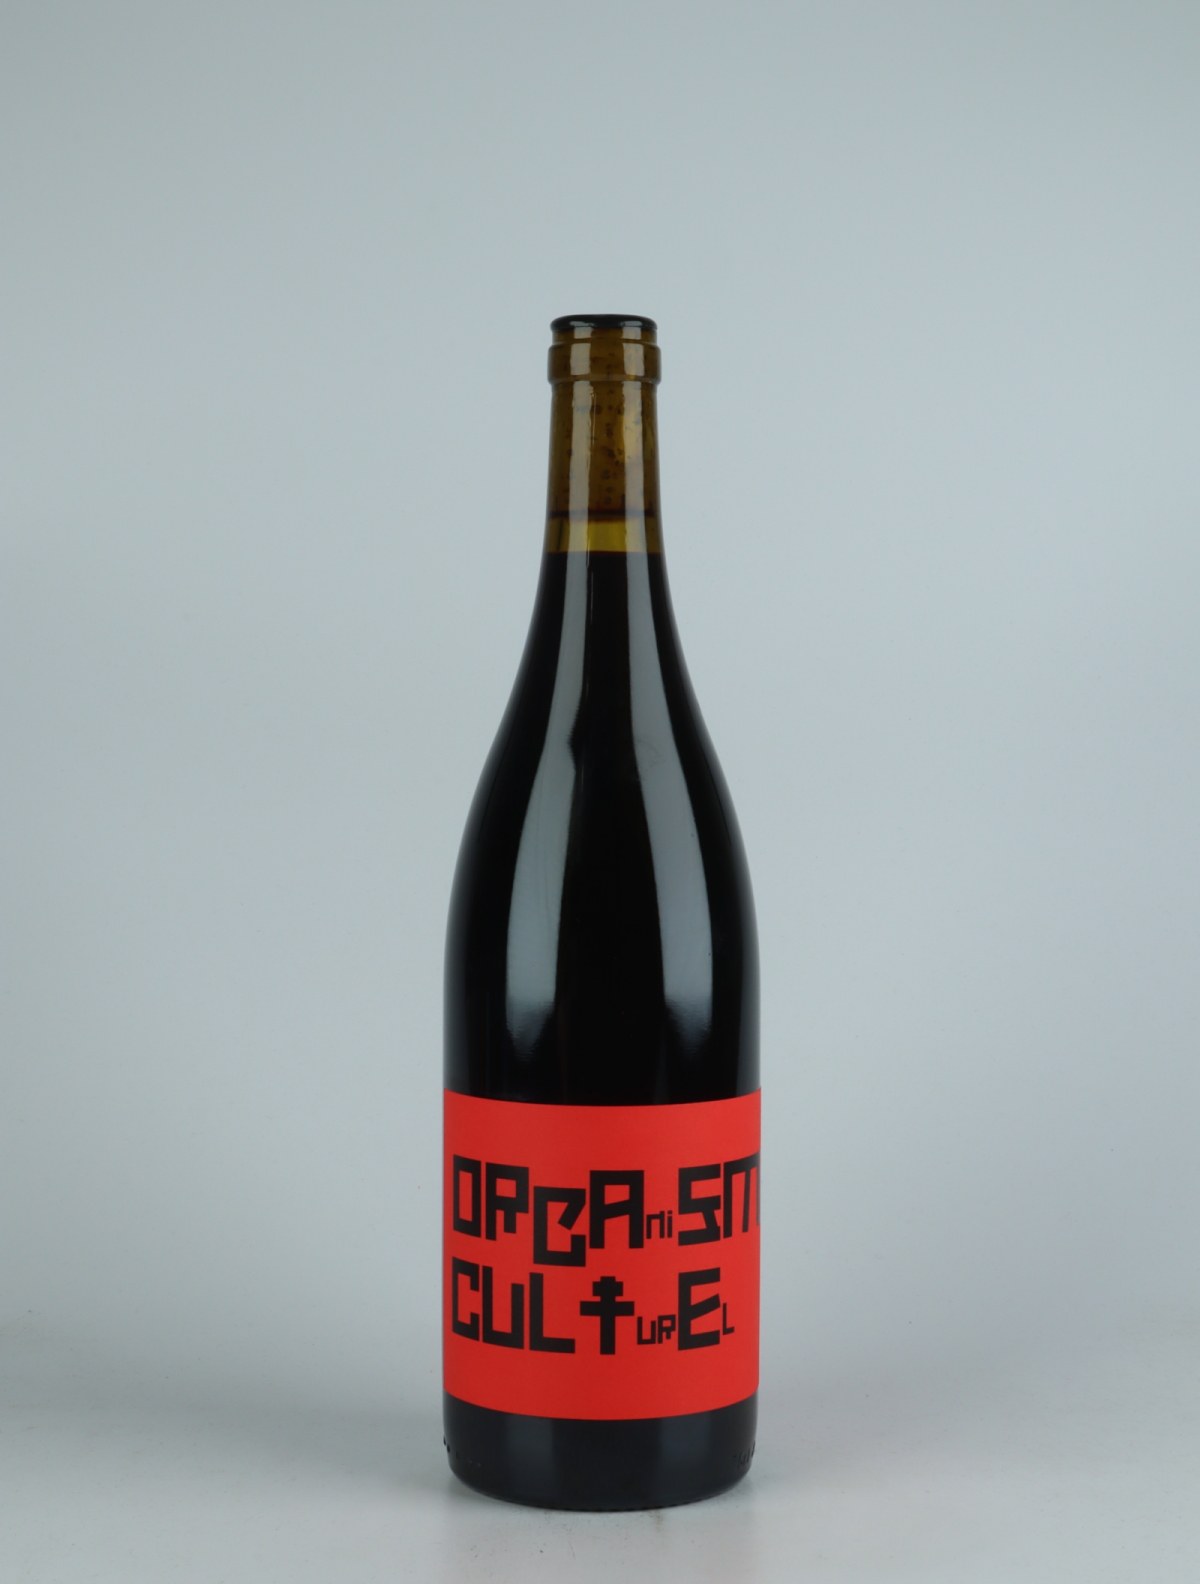 A bottle 2020 Bourgogne Rouge Côte Chalonnaise - Organisme Culturel Red wine from Benoit Delorme, Burgundy in France